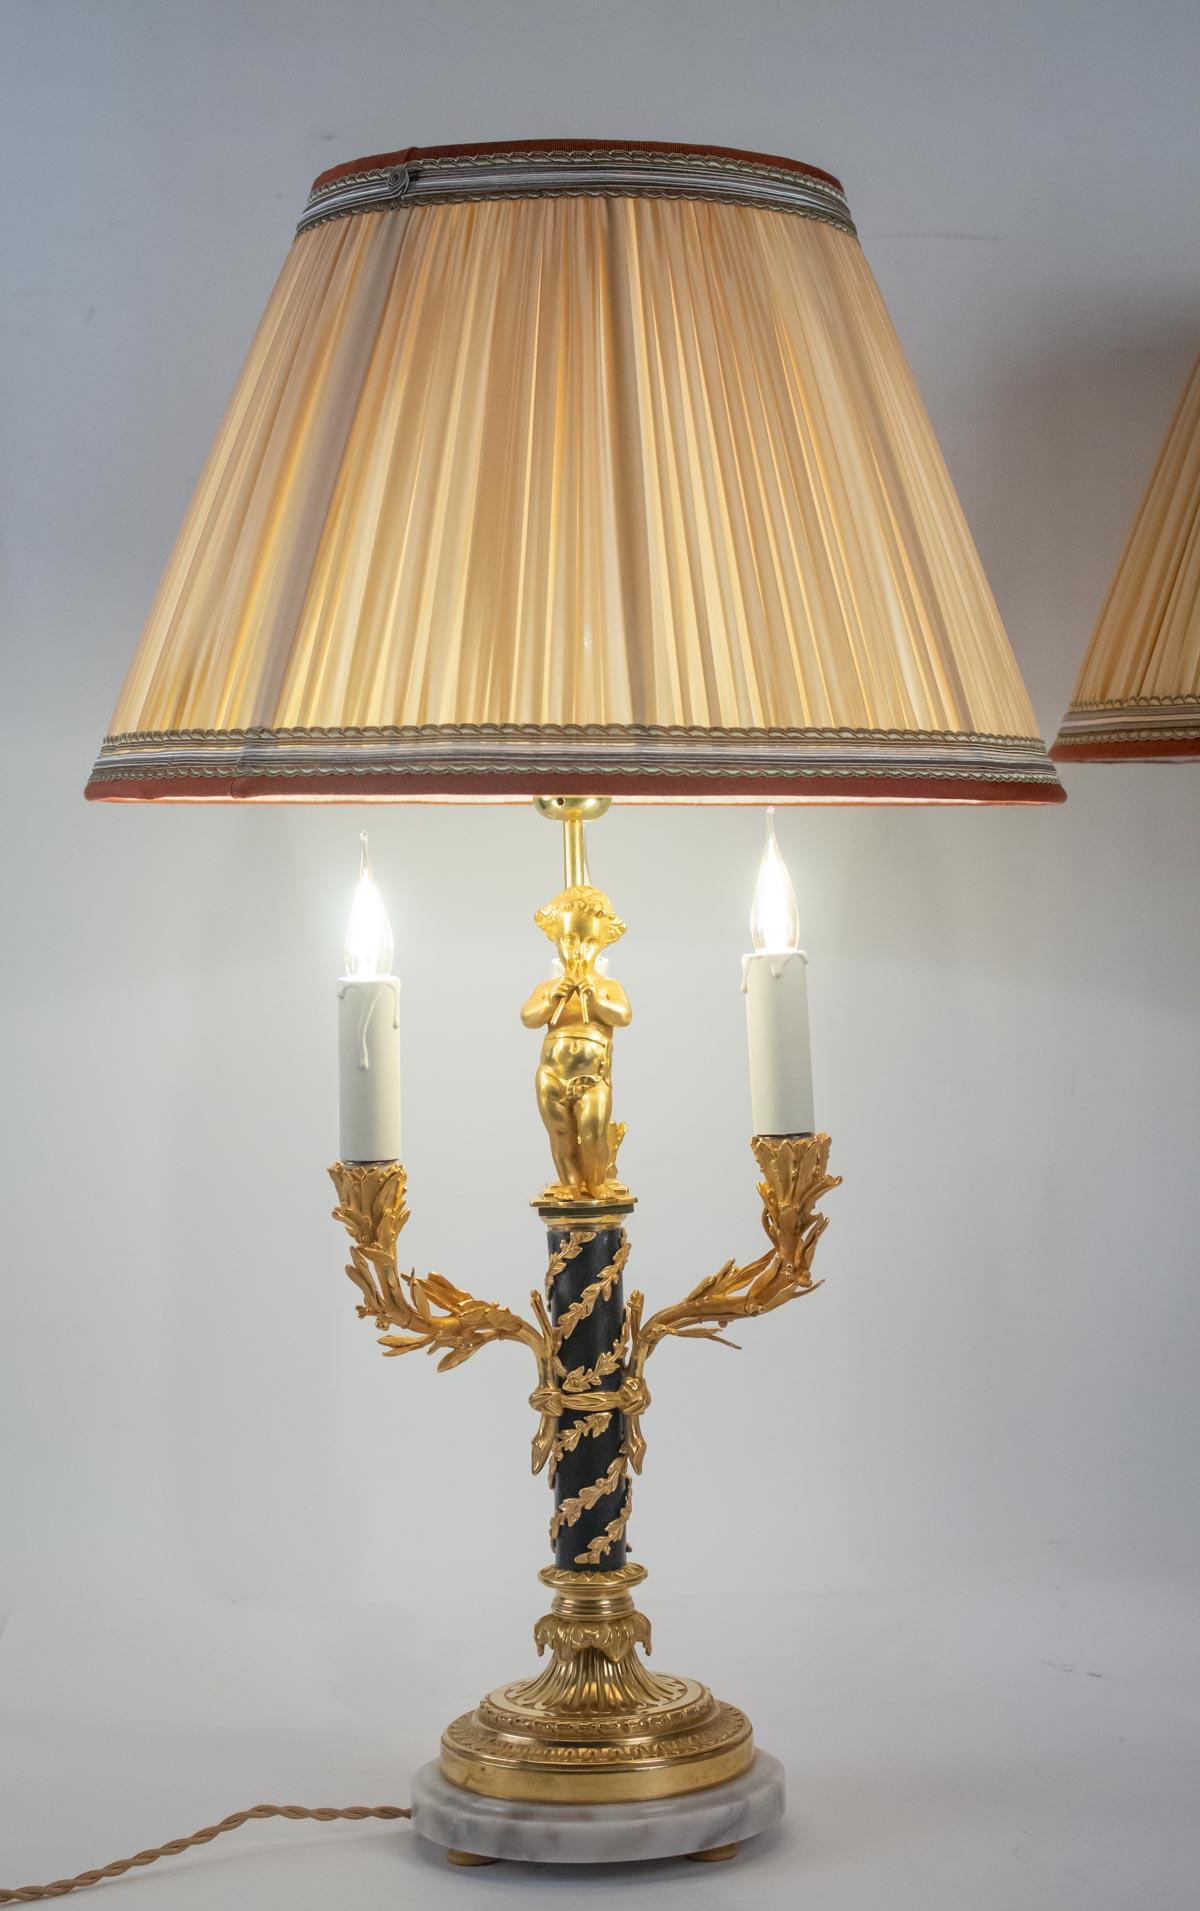 Pair of lamps in love, 3 lights, gilt bronze, patinated, Louis XVI style. Marble base, large decoration.